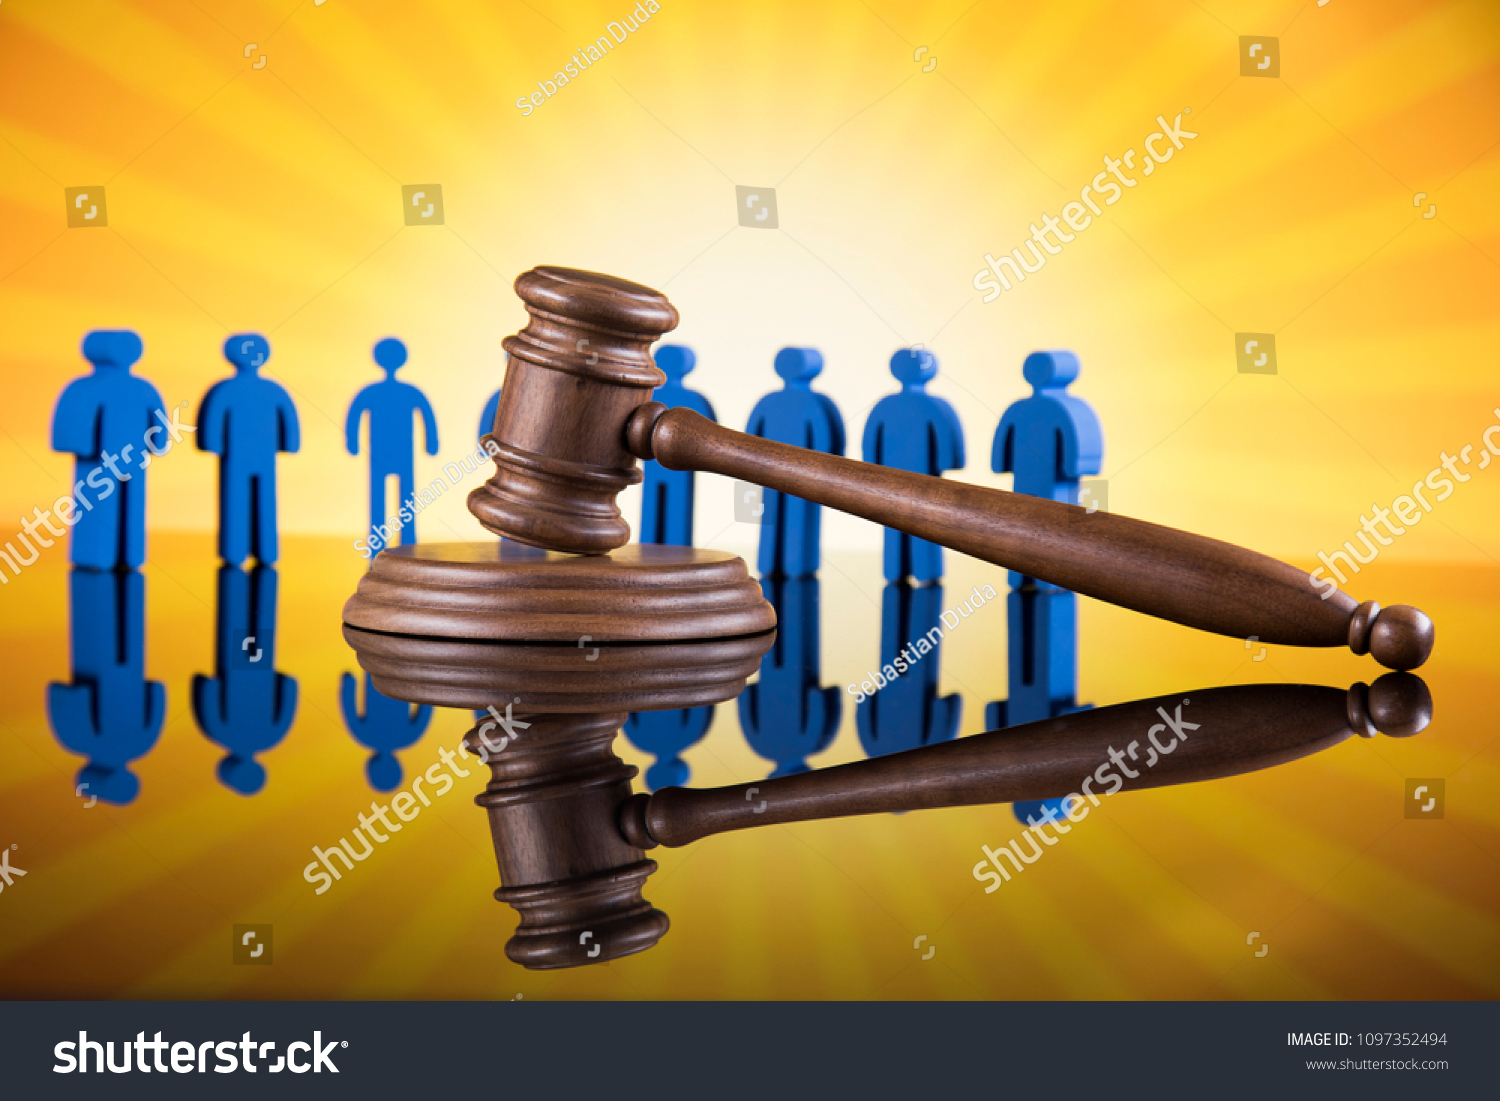 People law concept, Wooden gavel #1097352494